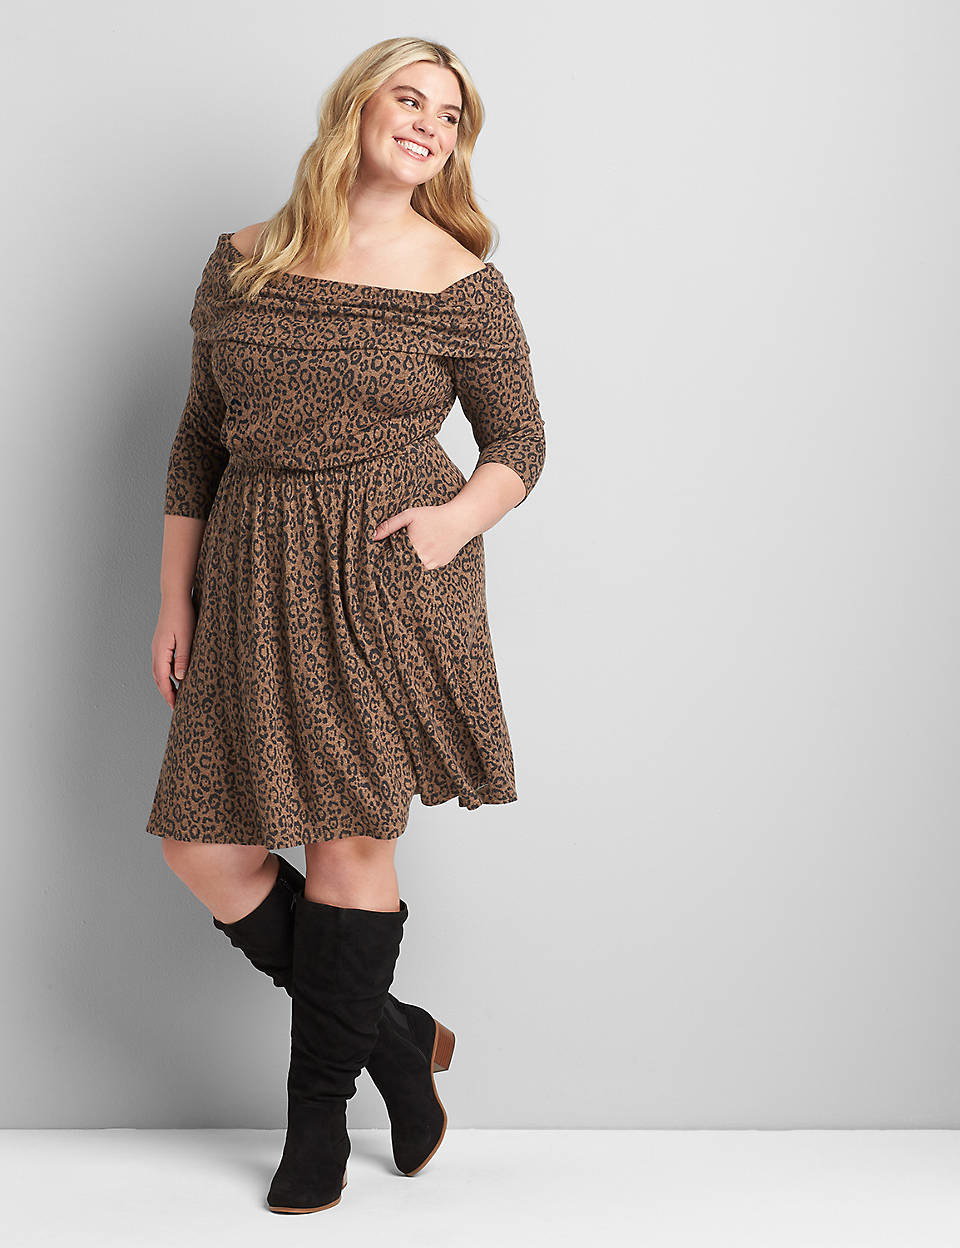 Model is wearing a leopard print off the shoulder dress with black calf-length boots